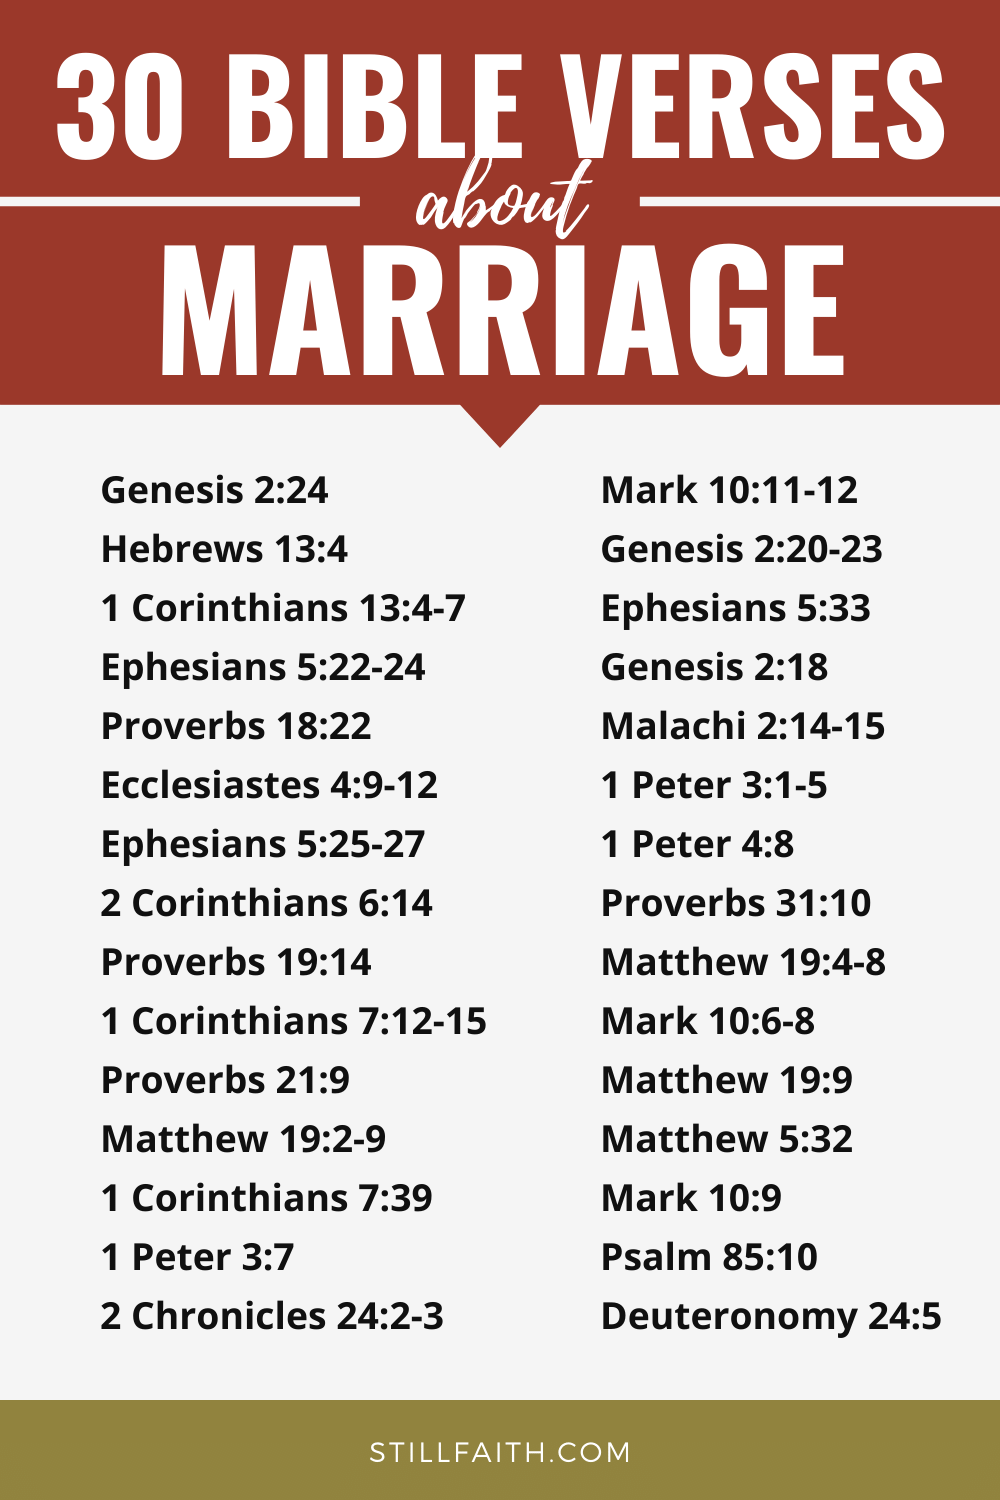 79 Bible Verses about Marriage